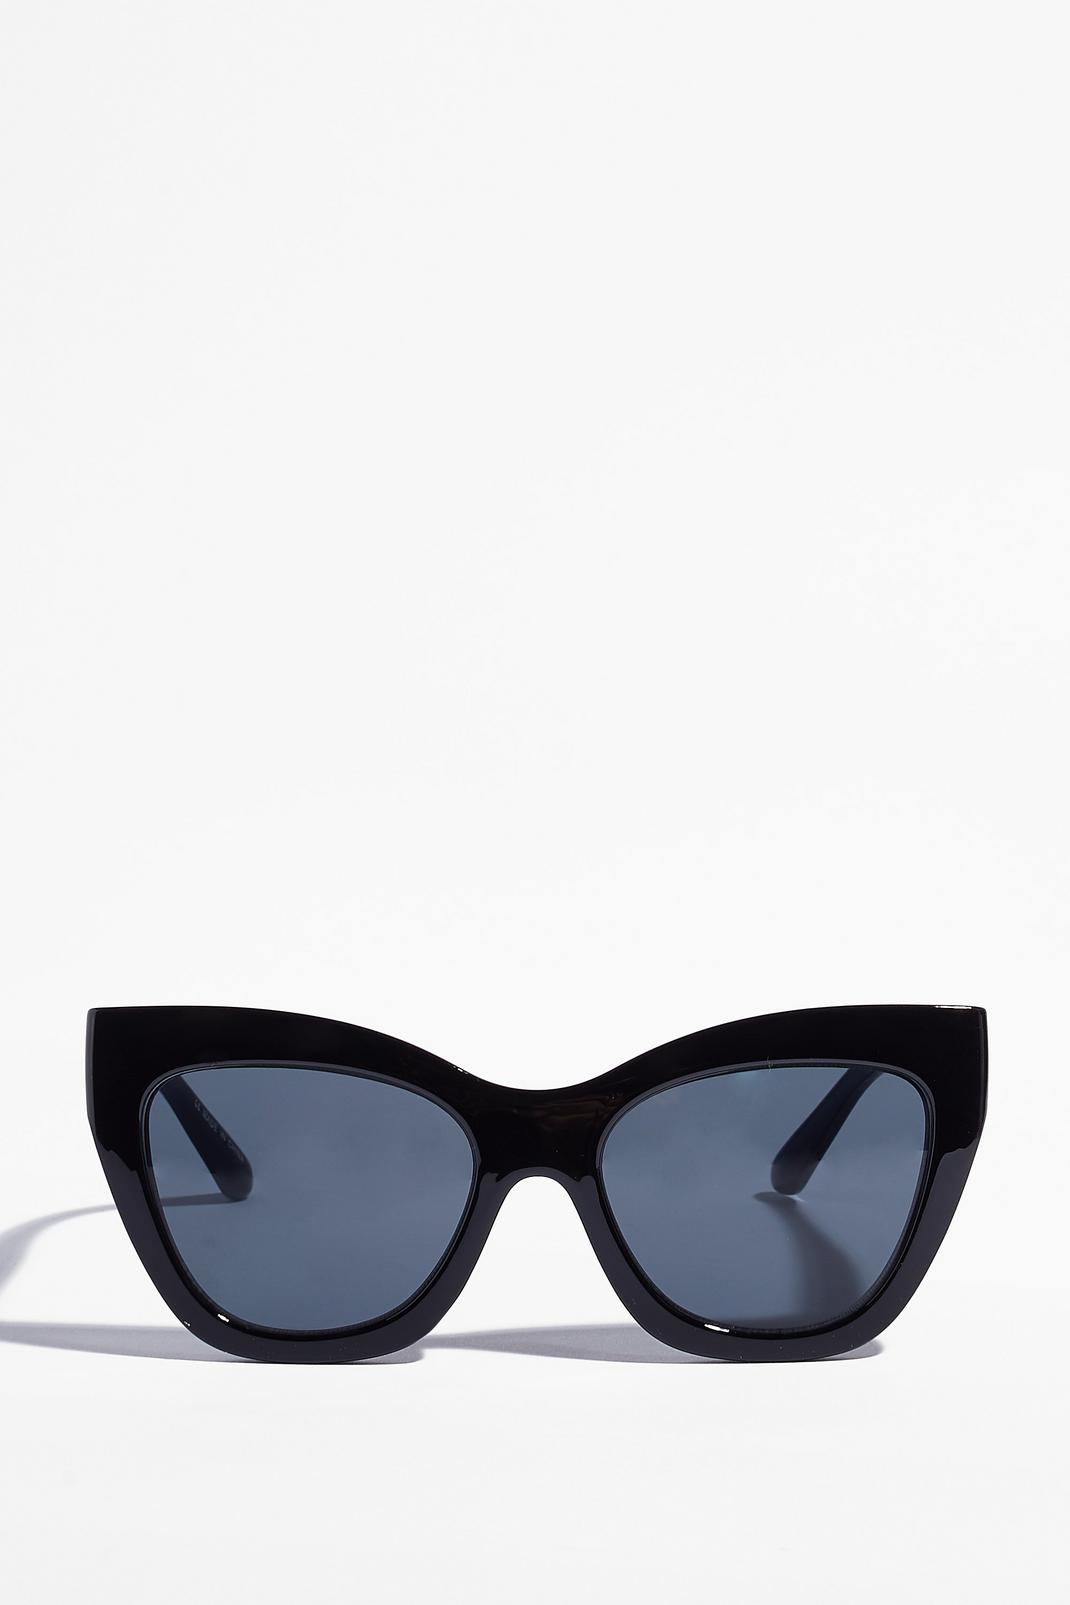 Black Purr-fect to Me Oversized Cat-Eye Sunglasses image number 1